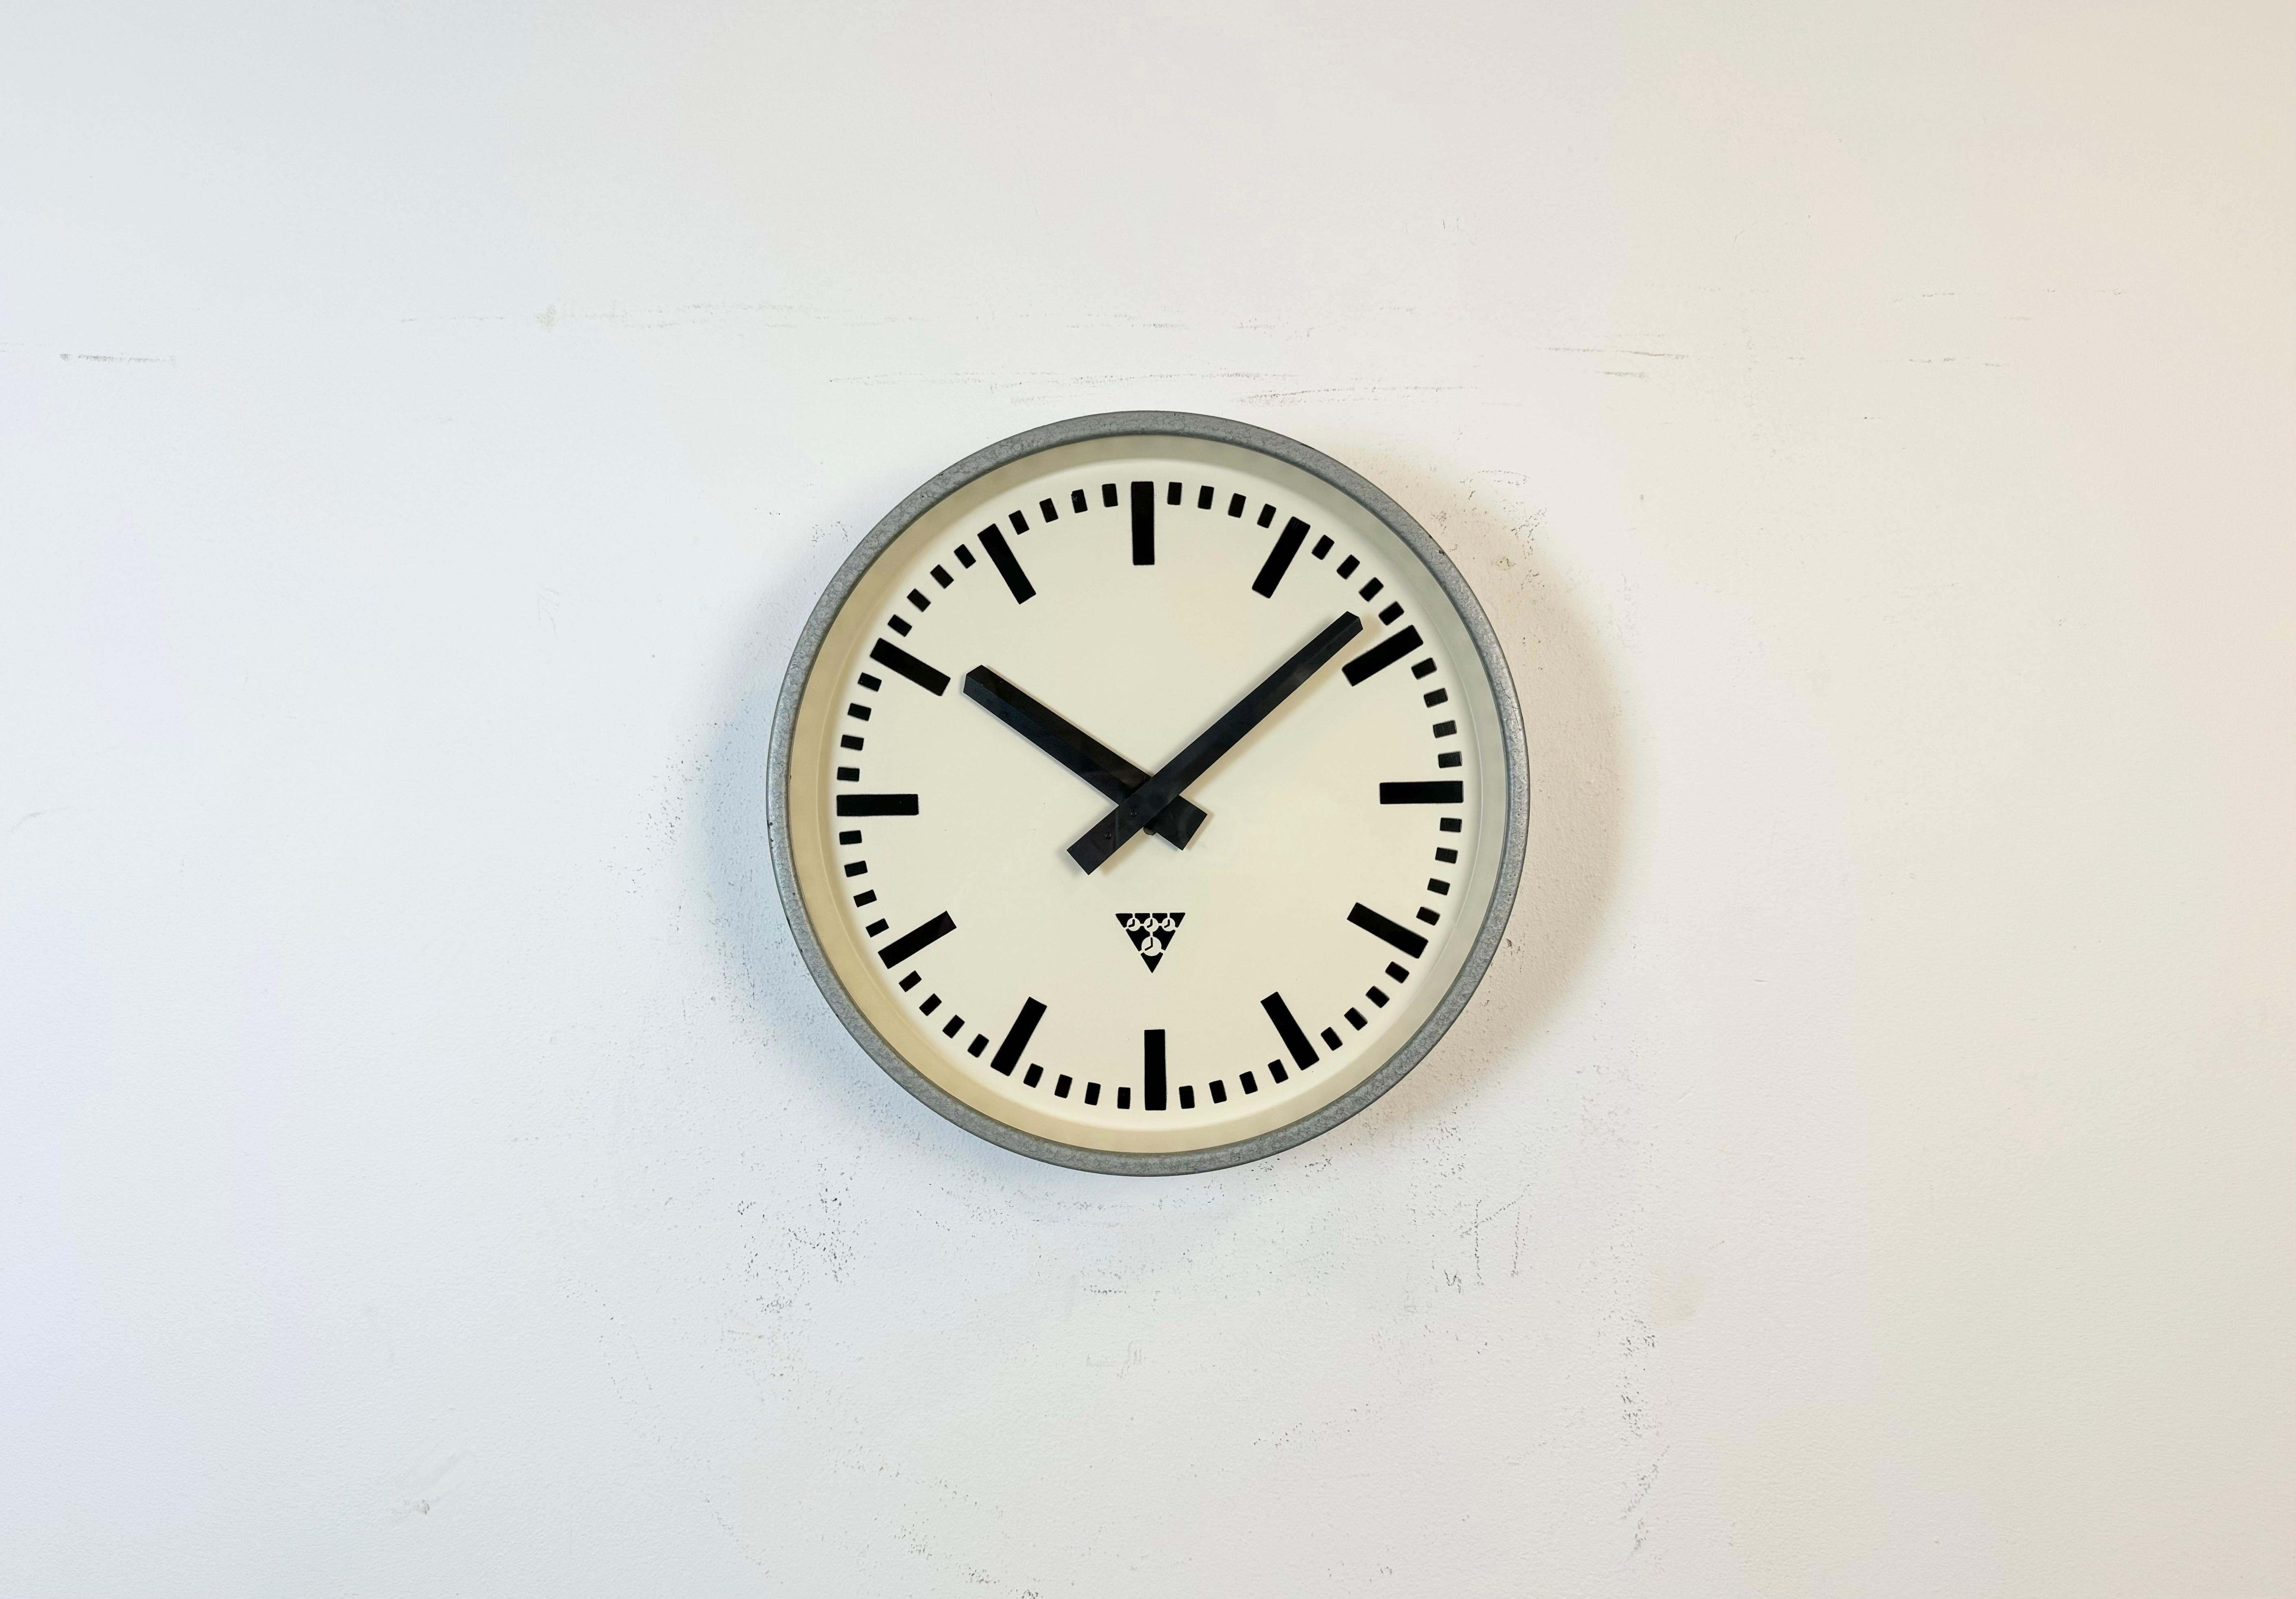 This wall clock was produced by Pragotron in former Czechoslovakia during the 1960s. It features a grey hammerpaint metal frame, an iron dial, an aluminium hands and a clear glass cover. Former factory electric slave clock has been converted into a